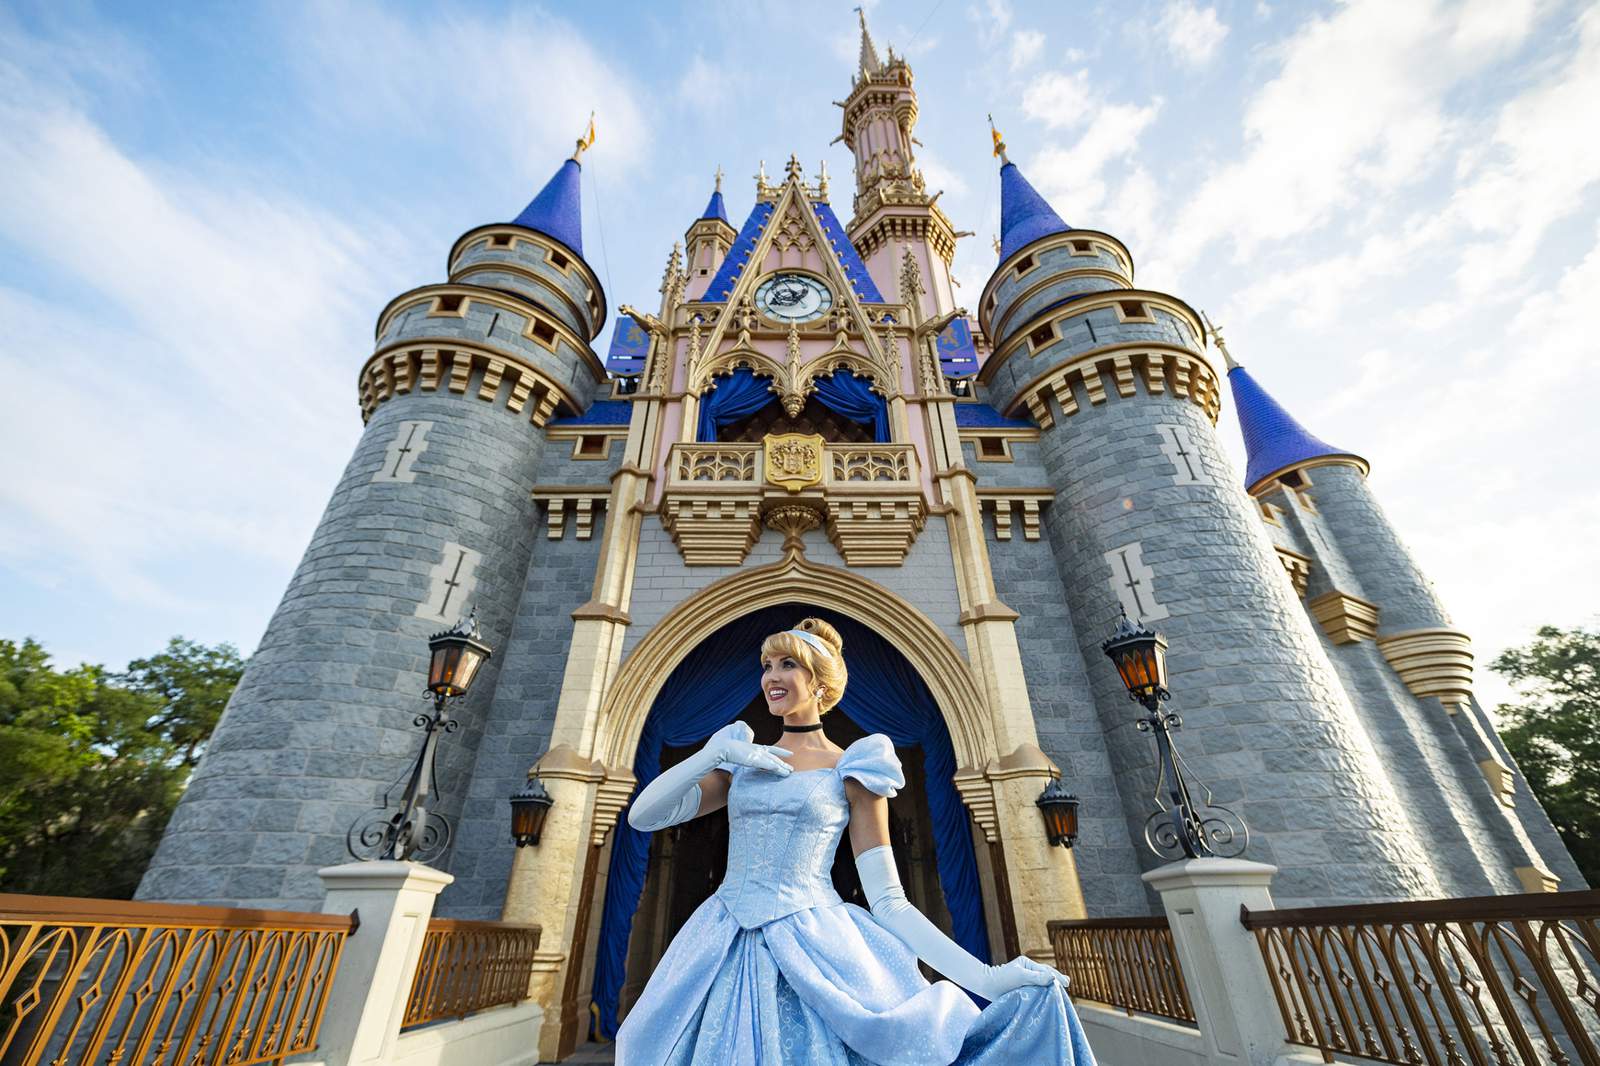 This special offer at Walt Disney World will get you two additional theme park tickets